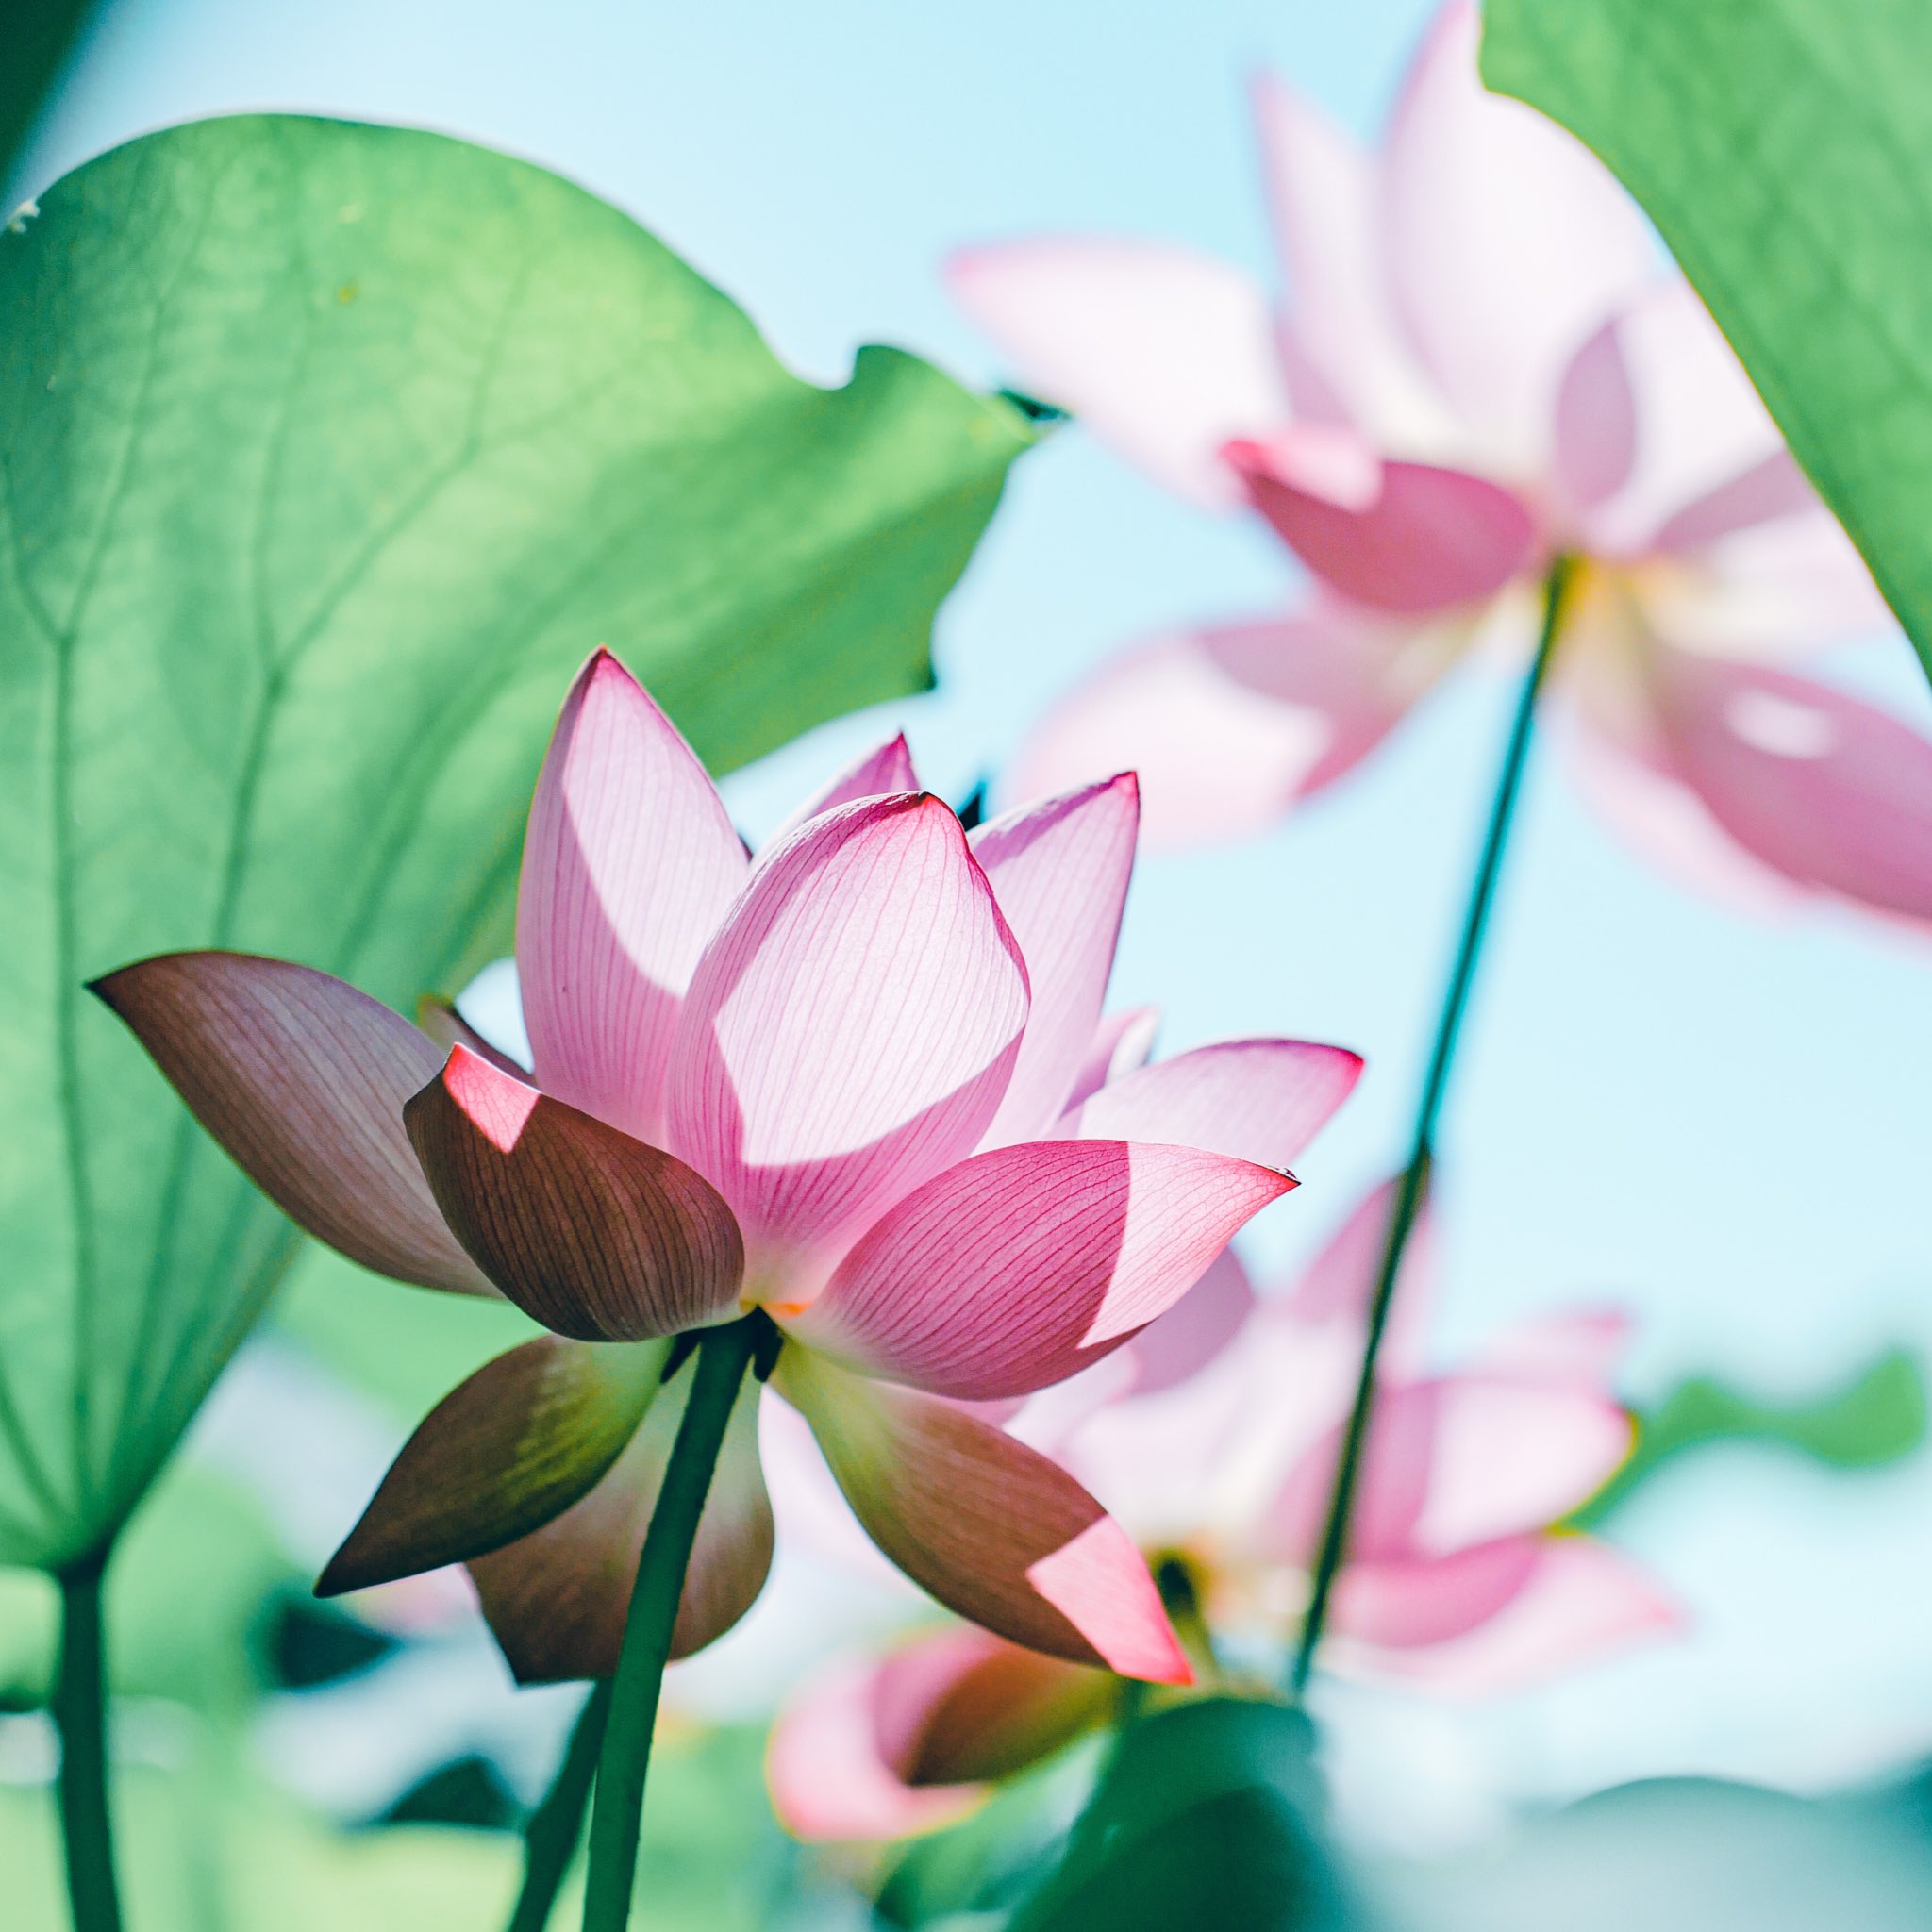 A deep pink lotus blossom blooms in the partial shade of surrounding leaves, while a second flower — blurred, beyond the focus of the lens — enjoys full sunlight.